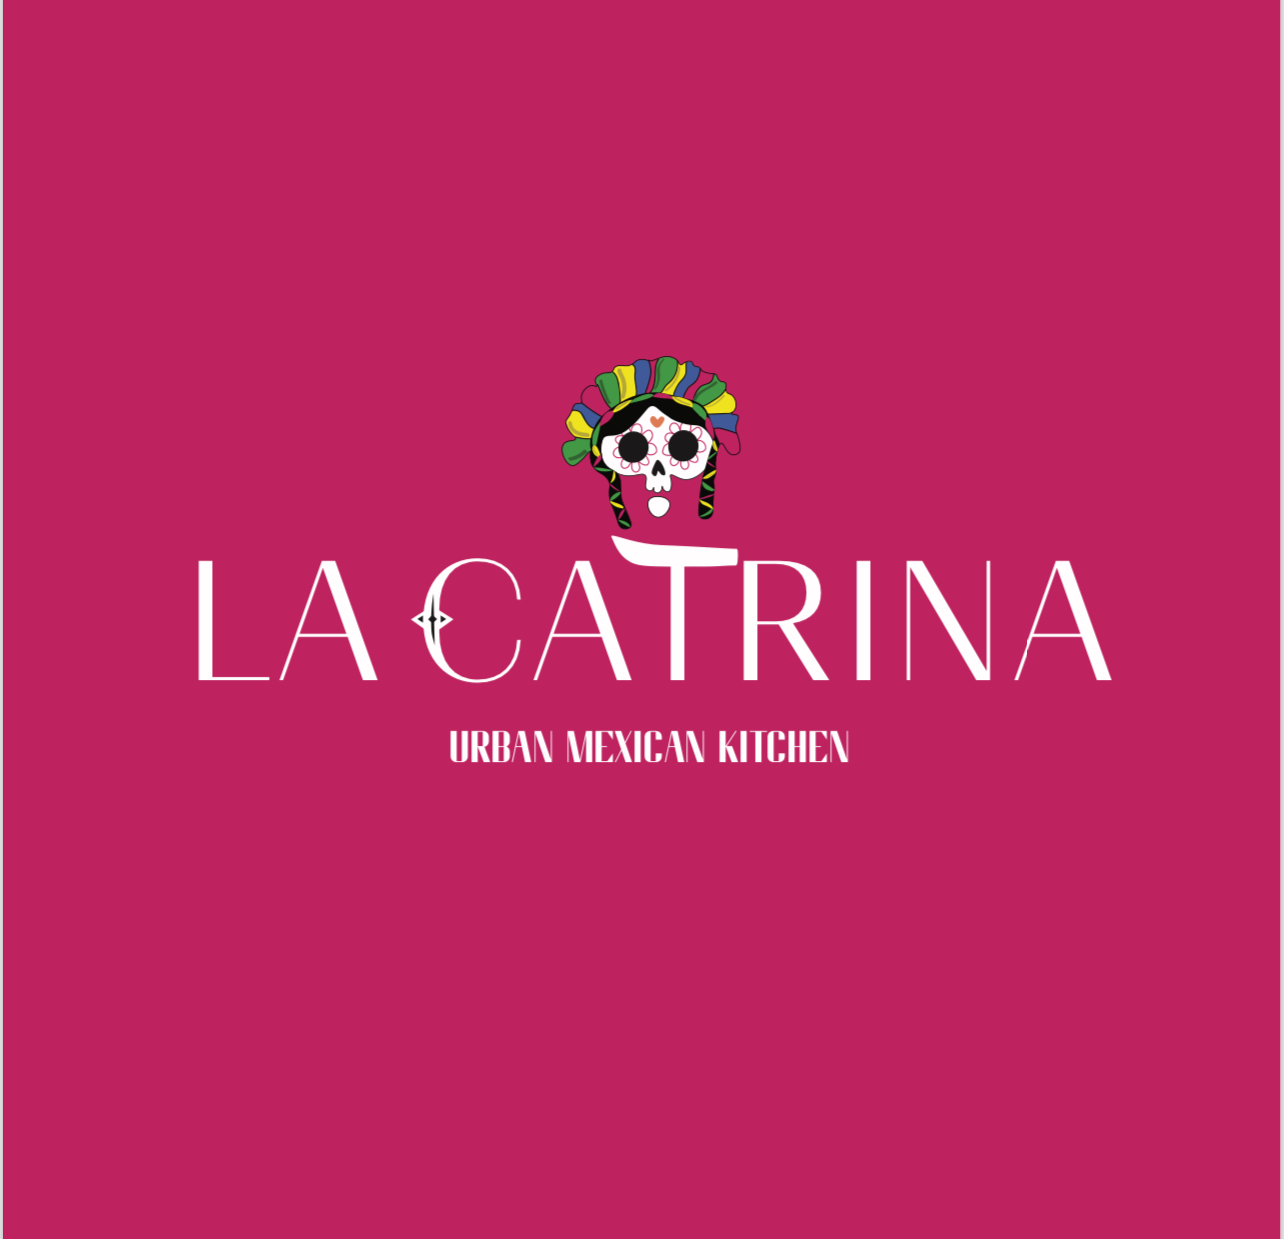 bright pink background with the words La Catrina mexican urban kitchen and a skull graphic.